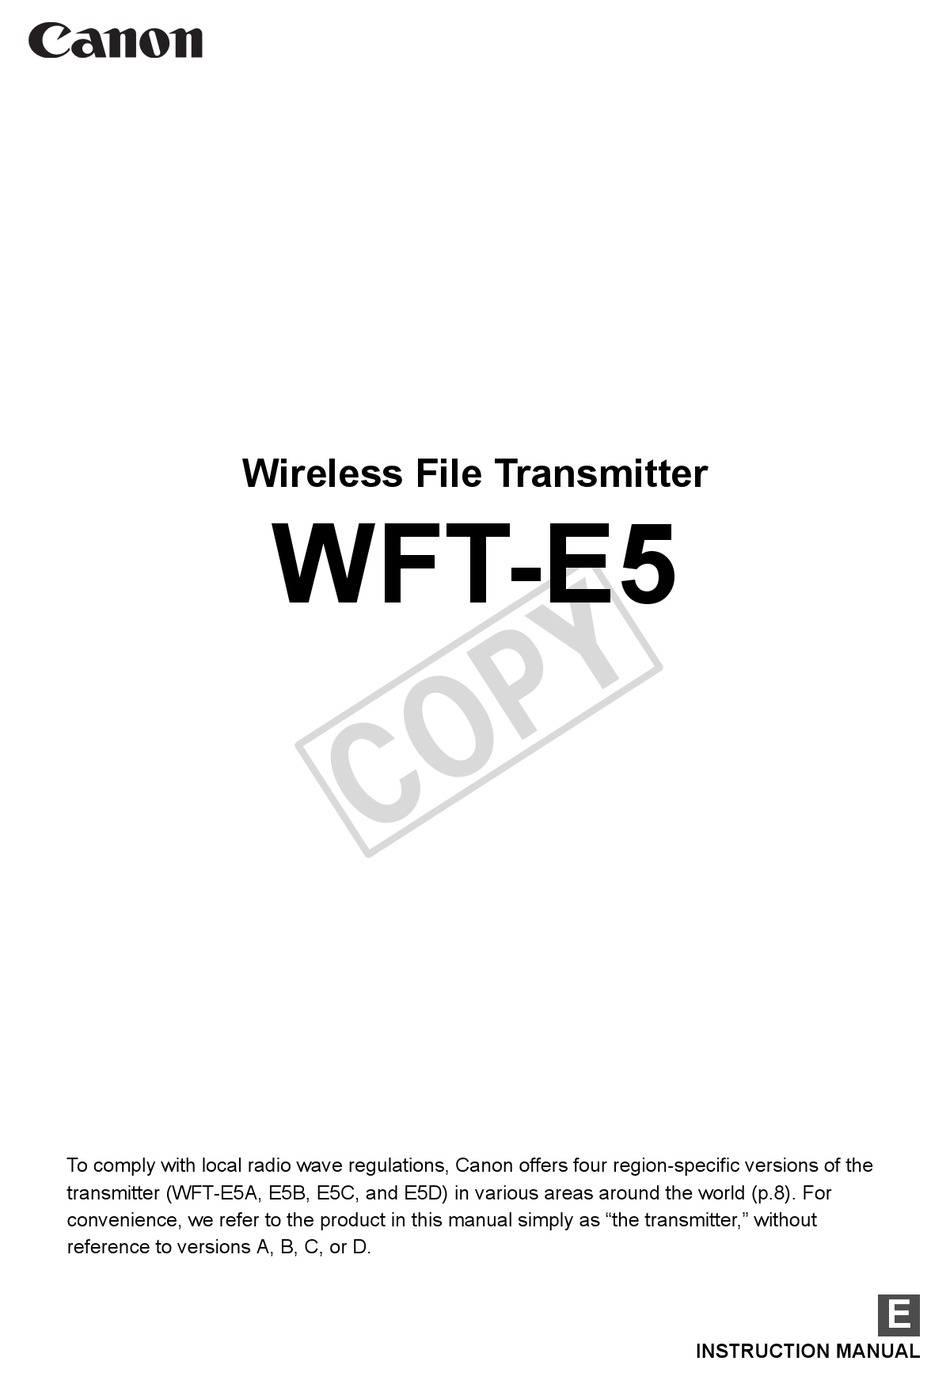 download wft pairing software canon